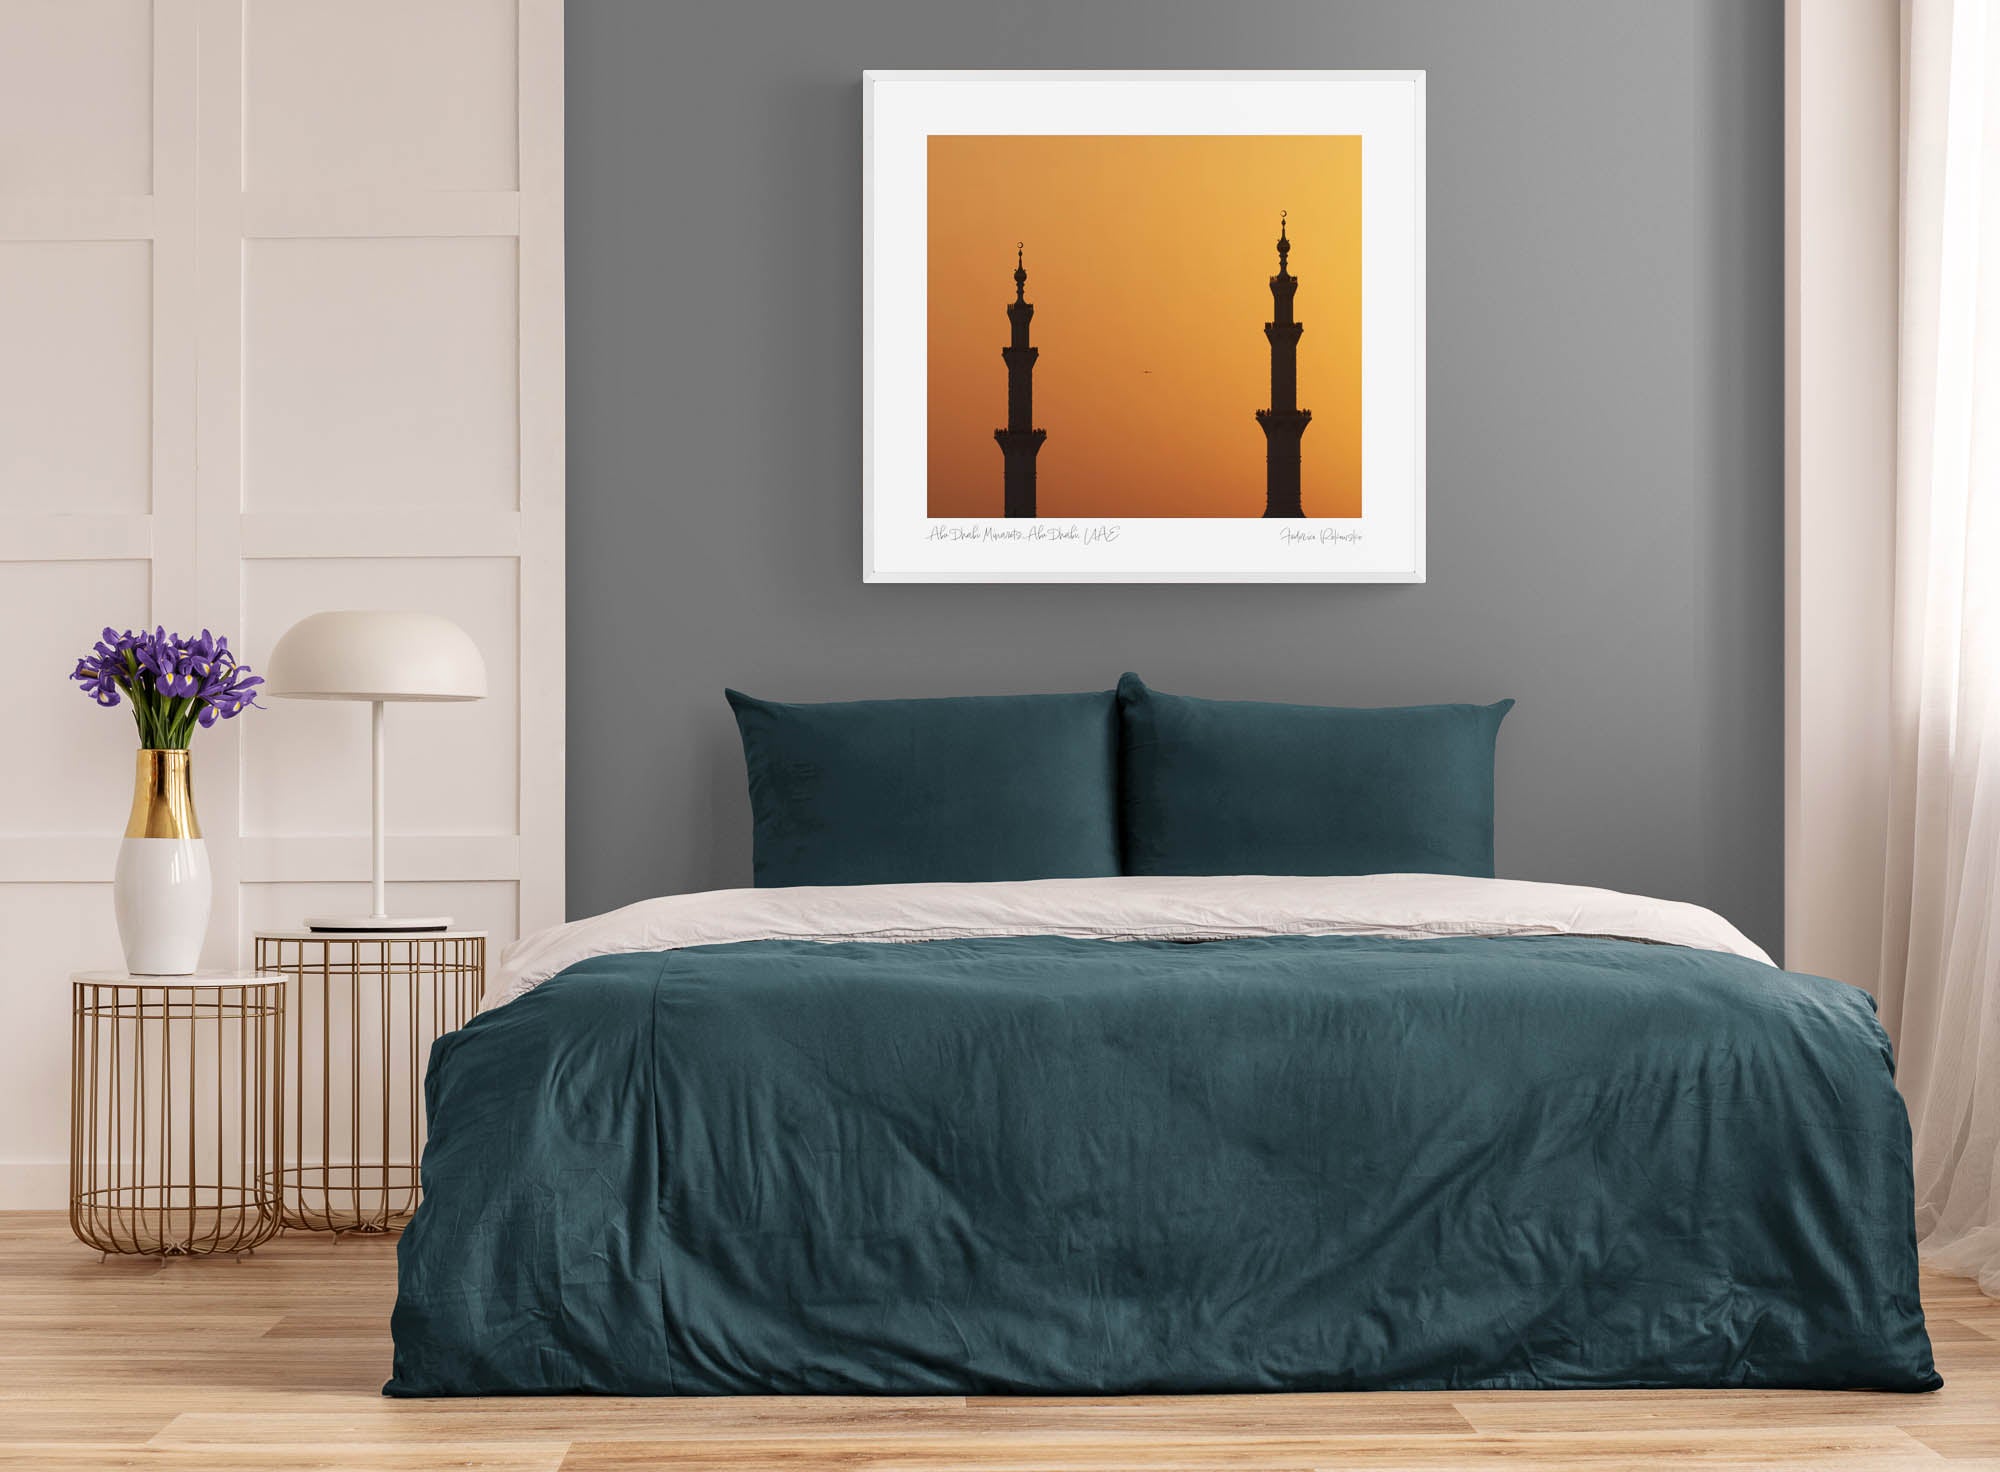 Silhouettes of two minarets against an orange sunset sky in Abu Dhabi.  Framed on a room